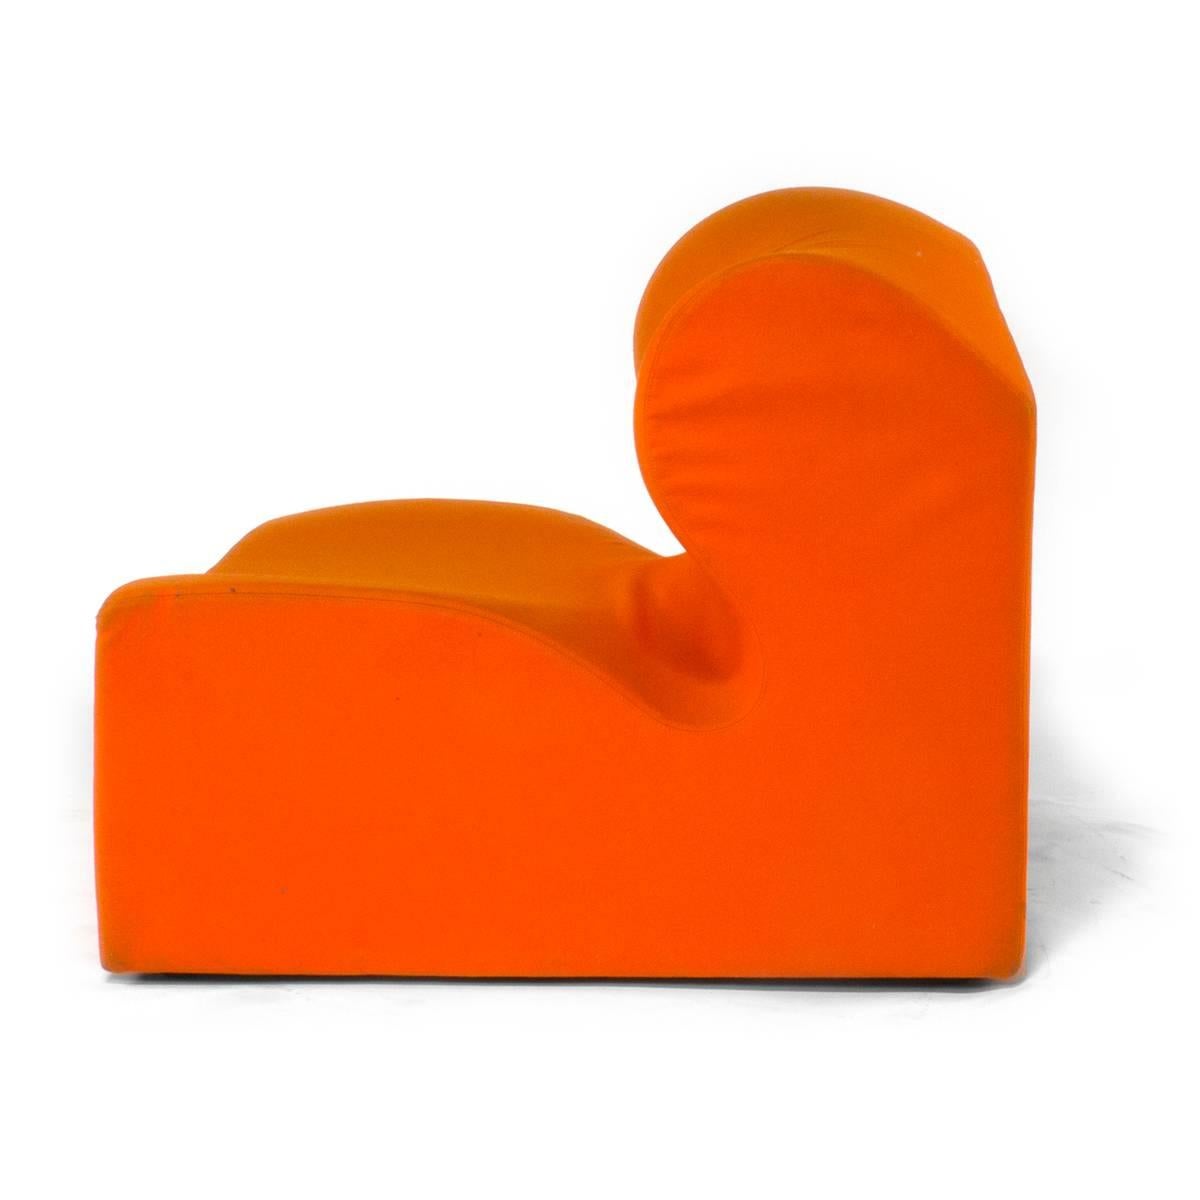 Contemporary Moroso Orange Misfits Central 1 Modular Sectional Sofa Unit by Ron Arad, Italy For Sale